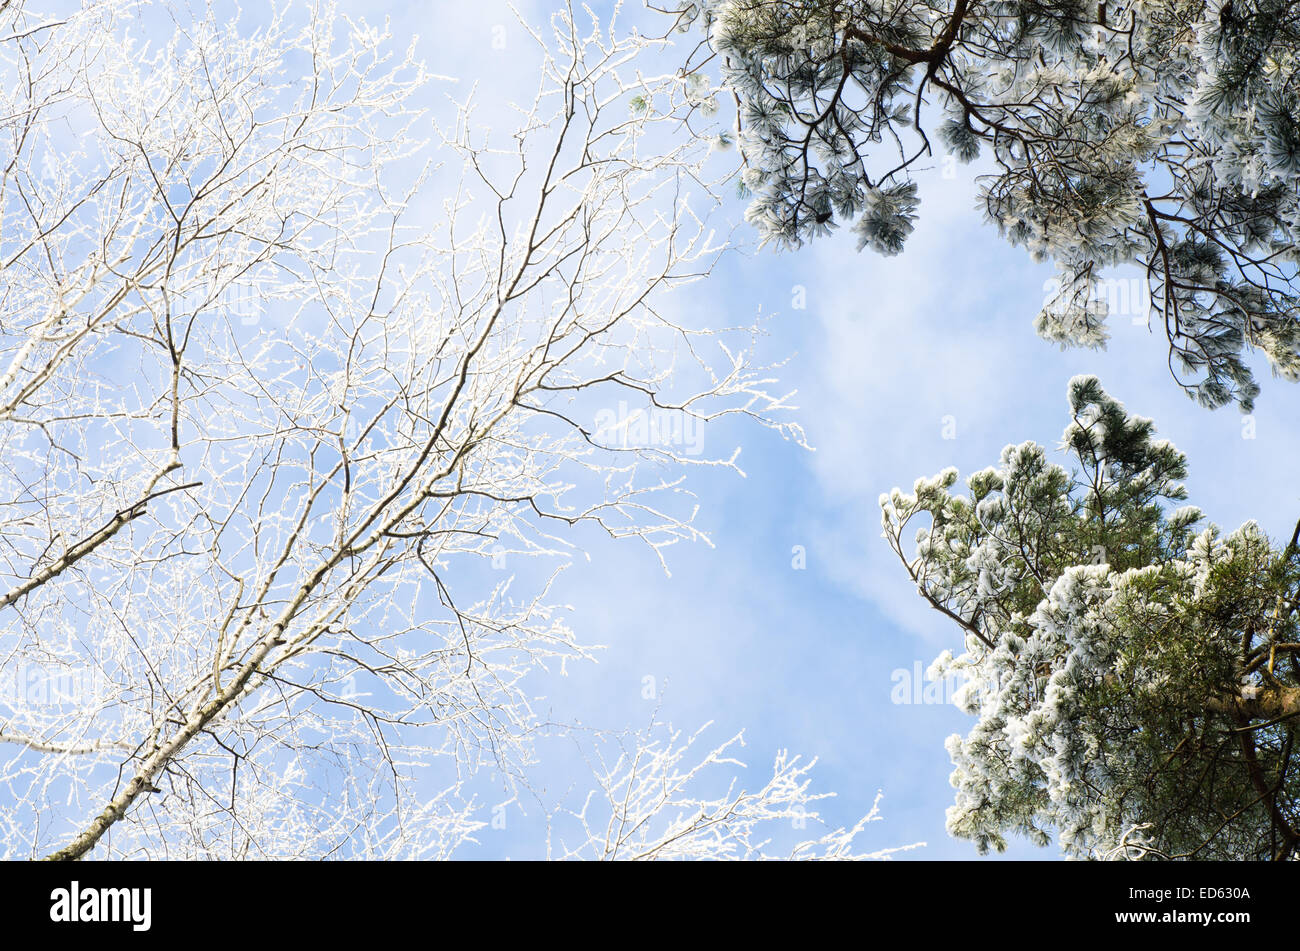 tree branches covered with snow against blue sky on sunny day Stock Photo